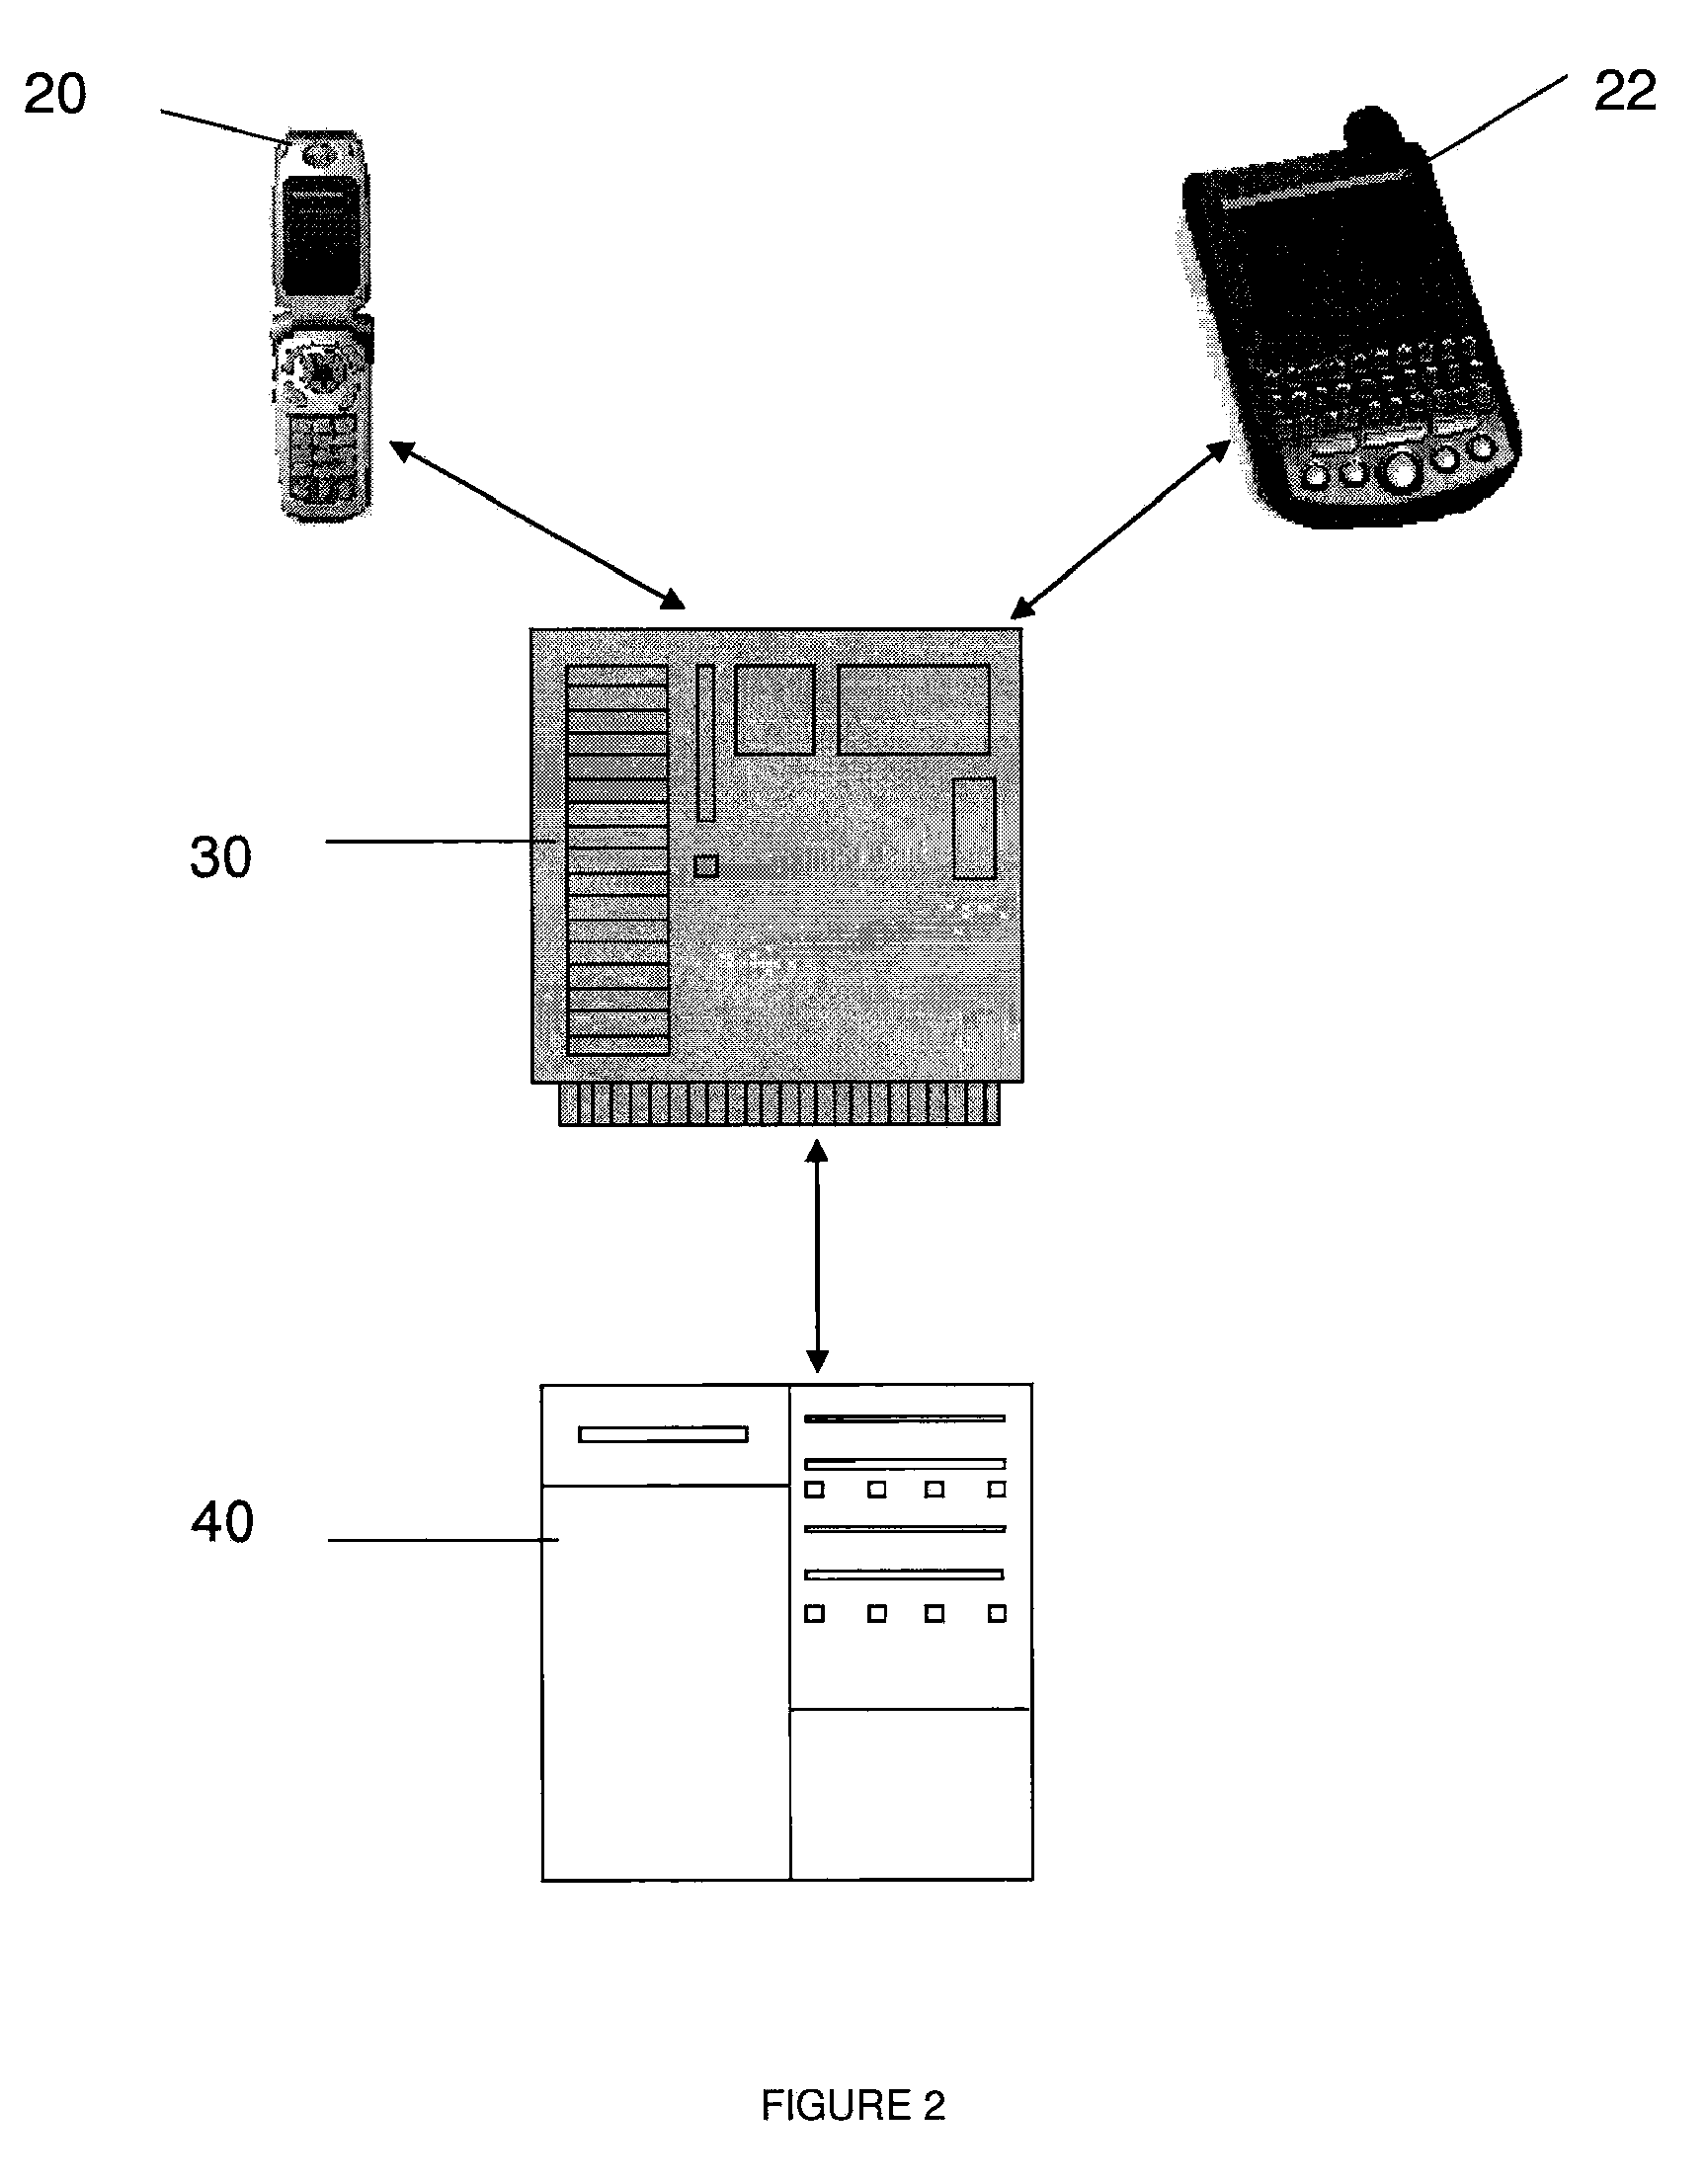 System and Method for Conducting Electronic Account Transactions